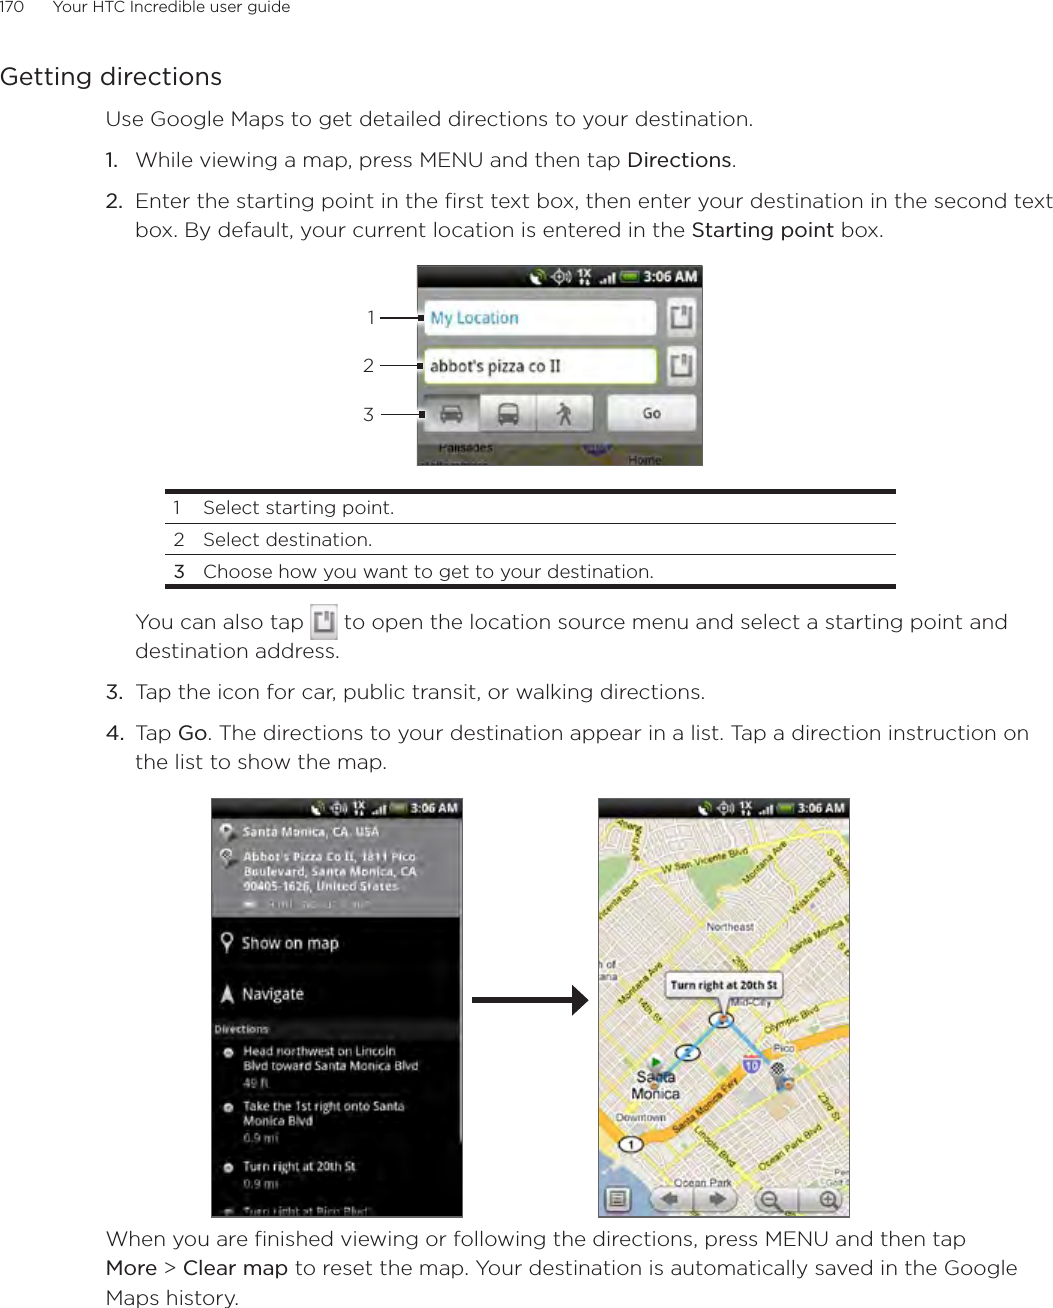 170      Your HTC Incredible user guide  Getting directionsUse Google Maps to get detailed directions to your destination.While viewing a map, press MENU and then tap Directions.Enter the starting point in the first text box, then enter your destination in the second text box. By default, your current location is entered in the Starting point box.3121  Select starting point. 2  Select destination.3  Choose how you want to get to your destination.You can also tap   to open the location source menu and select a starting point and destination address.Tap the icon for car, public transit, or walking directions.Tap Go. The directions to your destination appear in a list. Tap a direction instruction on the list to show the map. When you are finished viewing or following the directions, press MENU and then tap More &gt; Clear map to reset the map. Your destination is automatically saved in the Google Maps history.1.2.3.4.